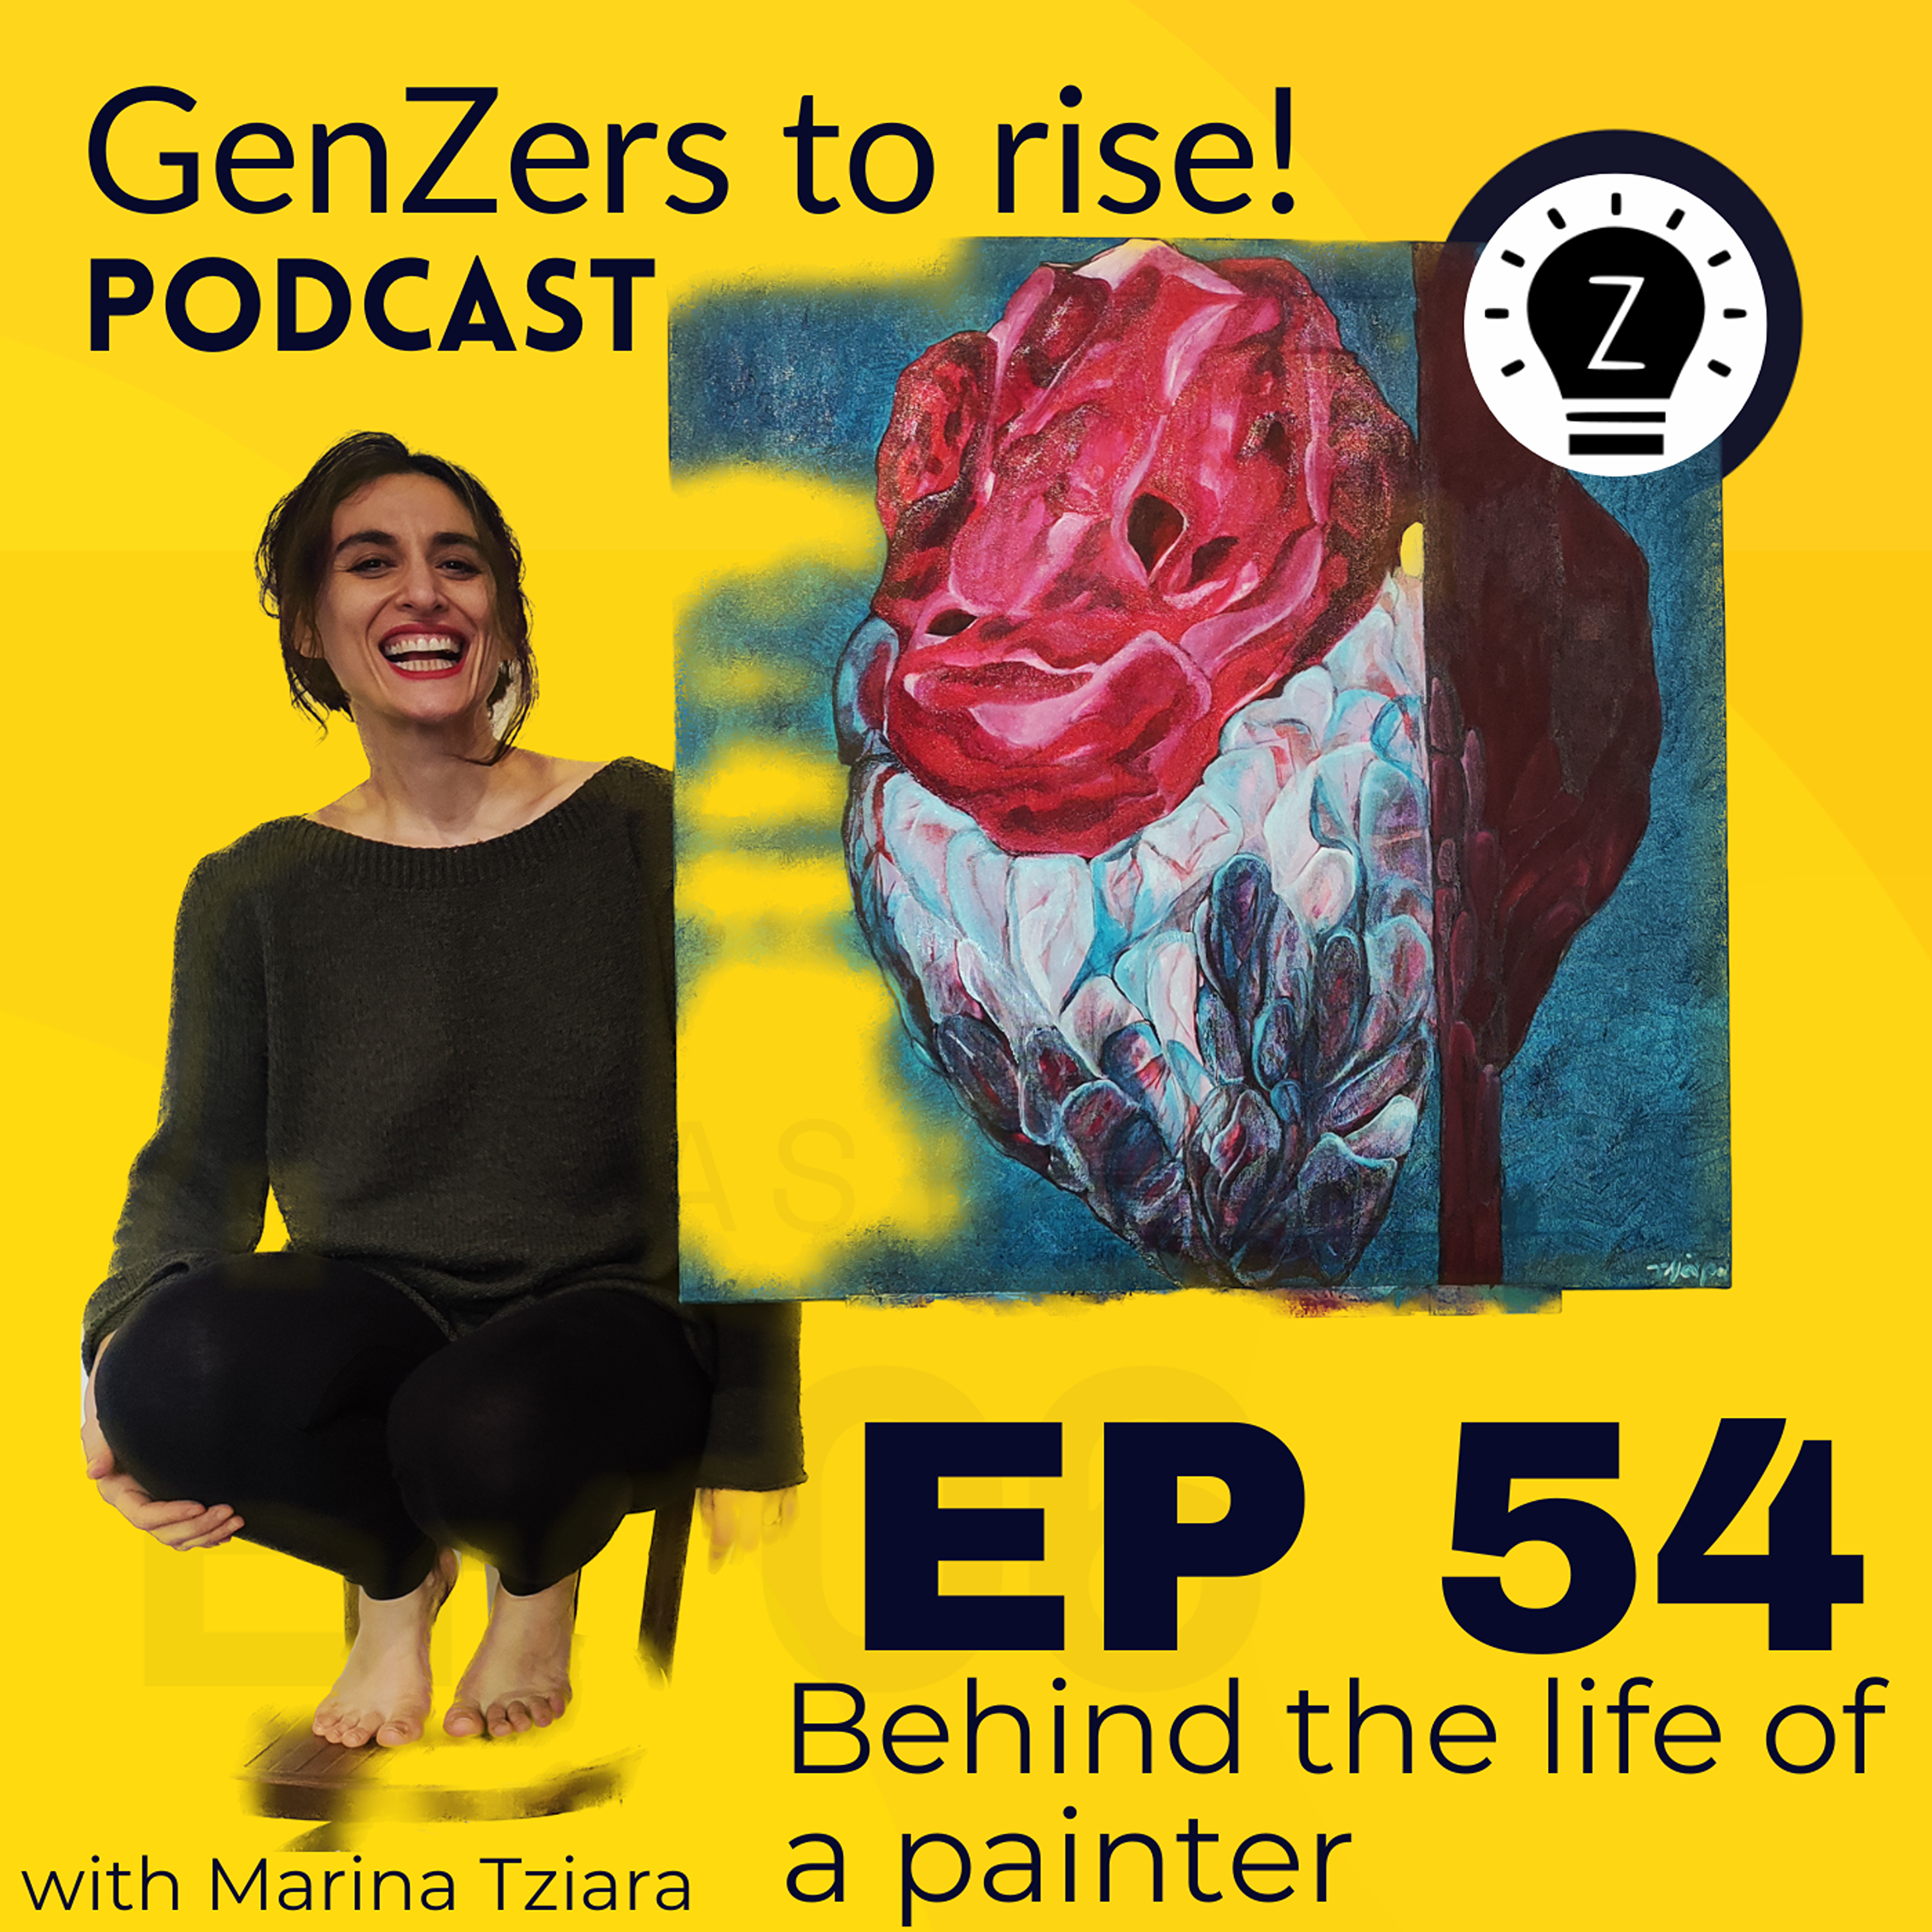 Behind the life of a painter with Marina Tziara